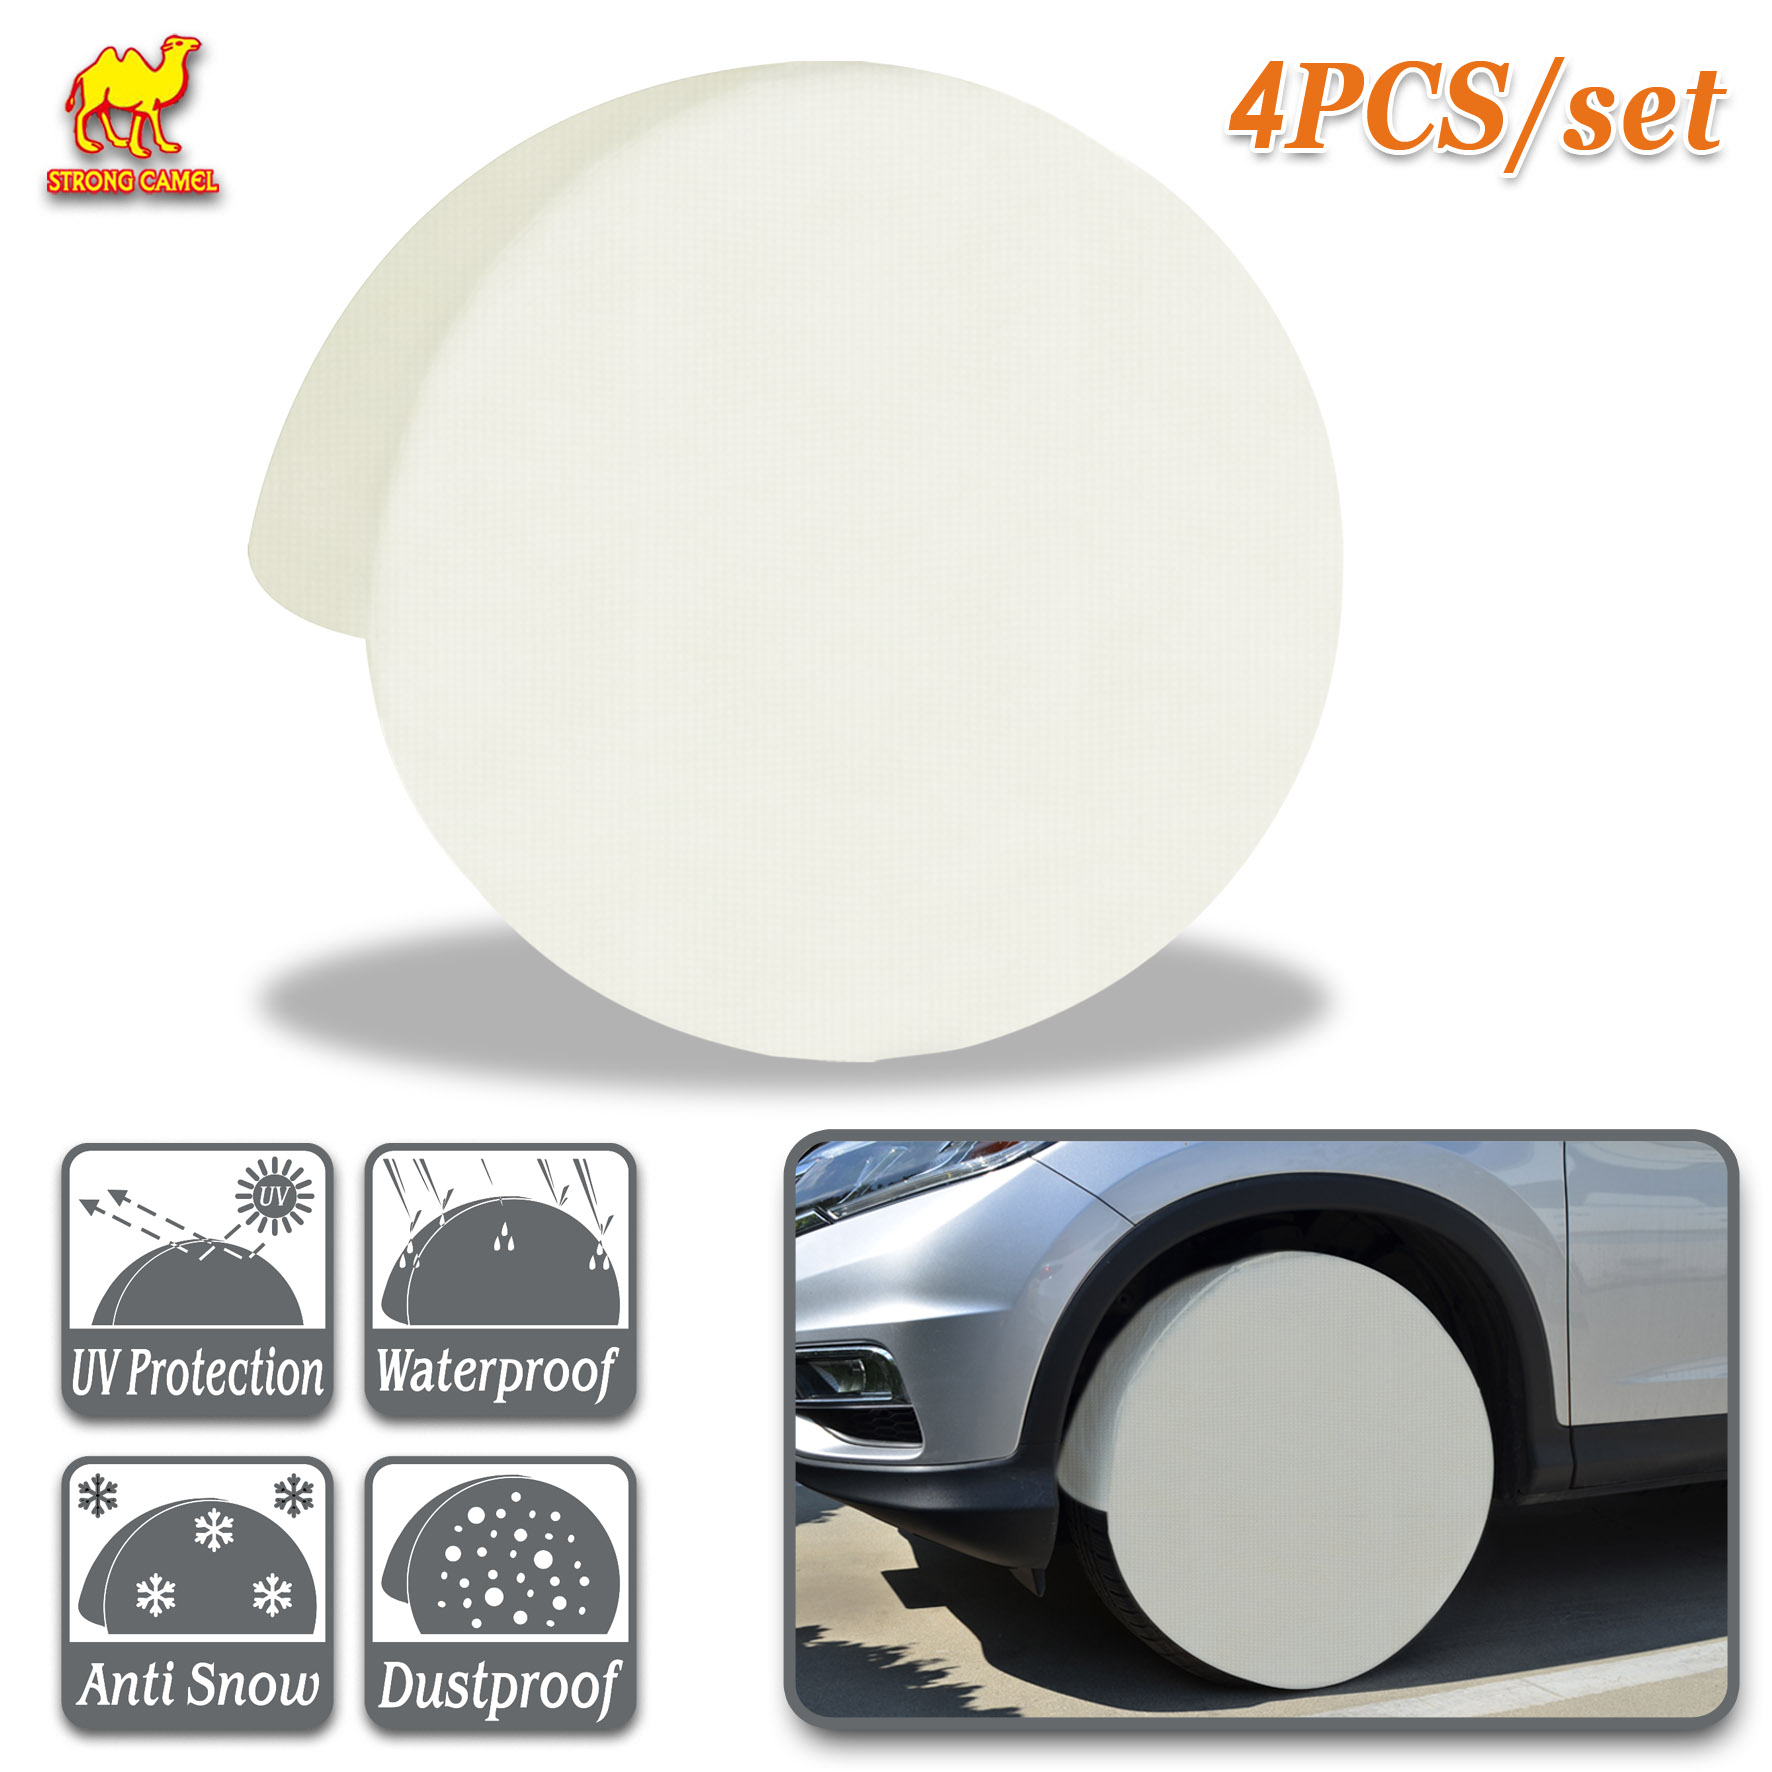 6 Layer Wheel Covers for RV Trailer Camper Truck Motorhome Auto,Waterproof Sun Rain Frost Snow Protector Aluminum Film XicBoom Tire Covers Set of 4